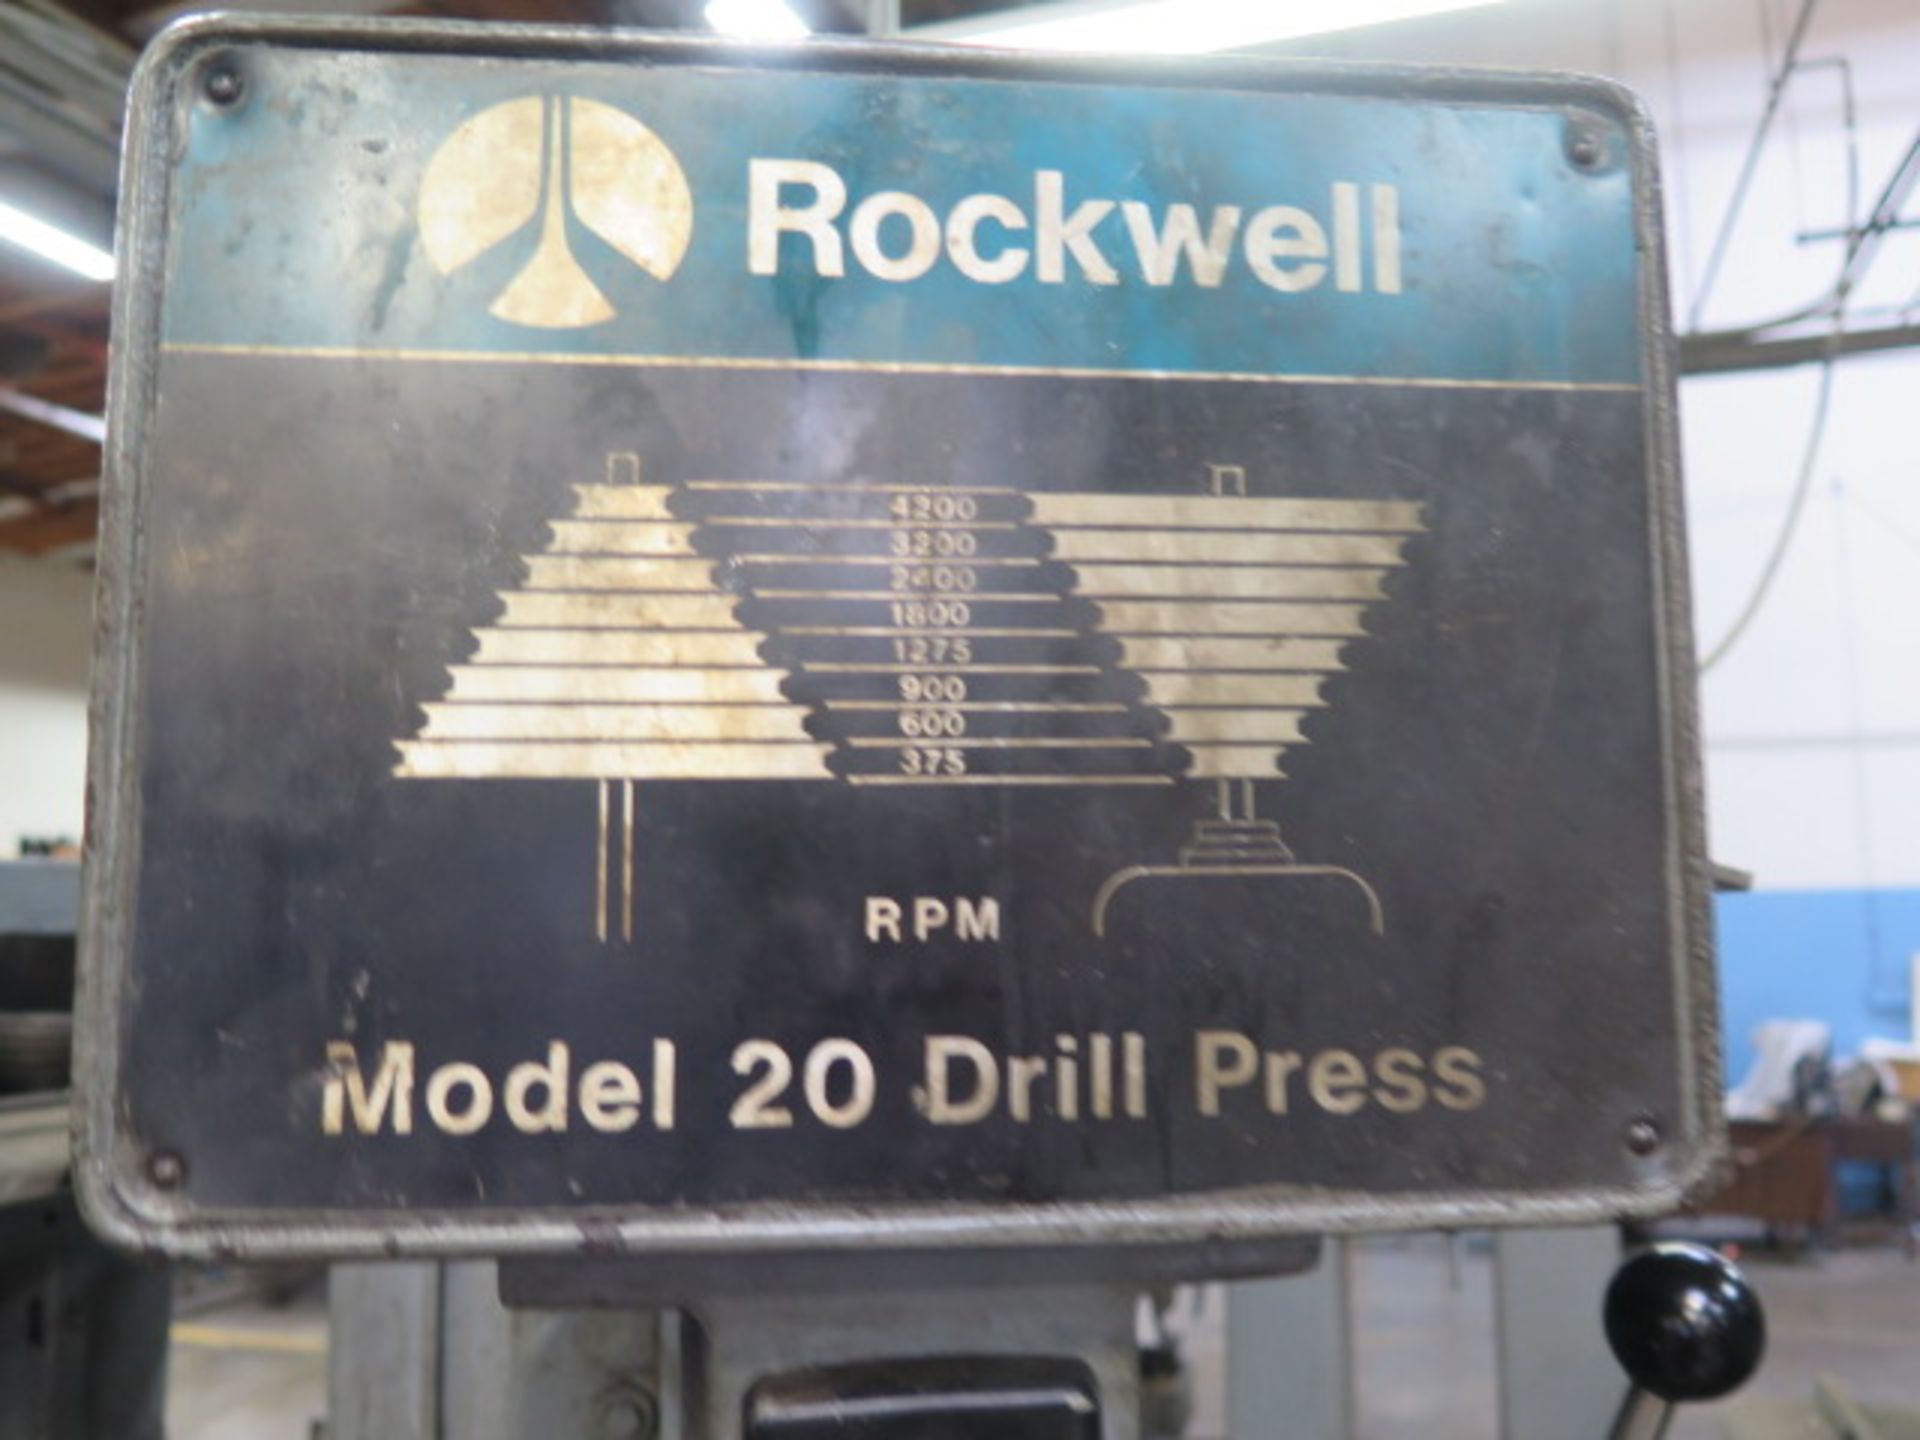 Rockwell 4-Head Gang Drill Press w/ (4) Model 20 8-Speed Drill Heads, 24" x 106" Table SOLD AS-IS - Image 4 of 7